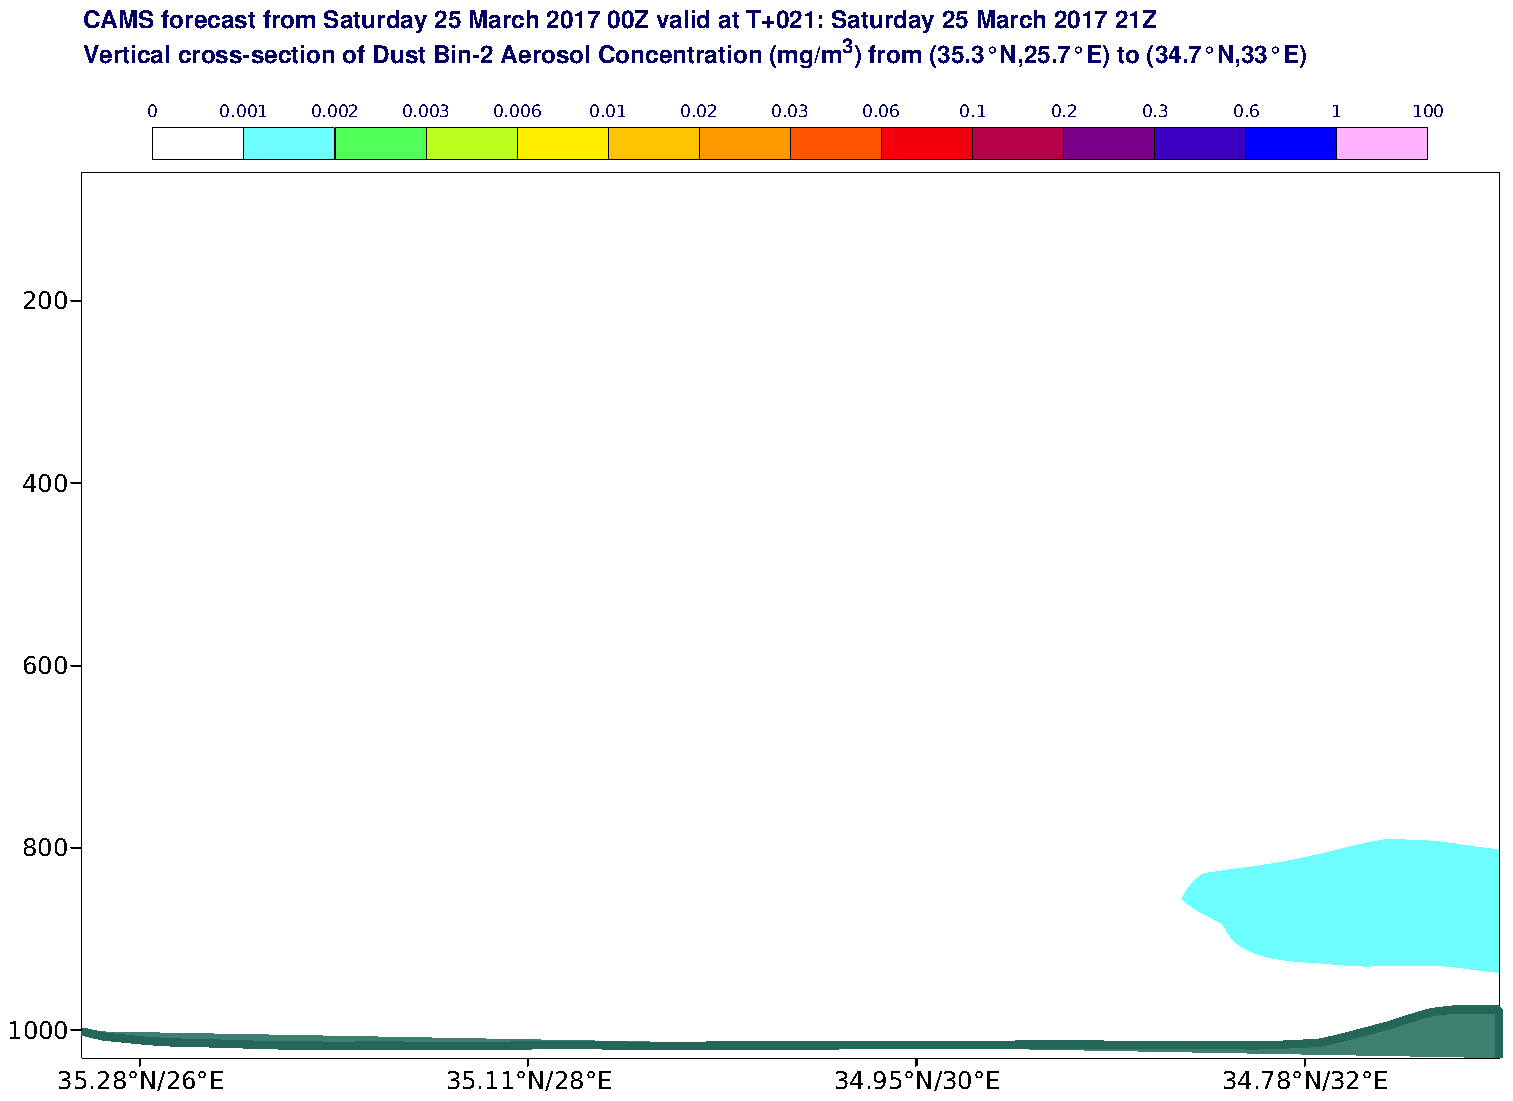 Vertical cross-section of Dust Bin-2 Aerosol Concentration (mg/m3) valid at T21 - 2017-03-25 21:00